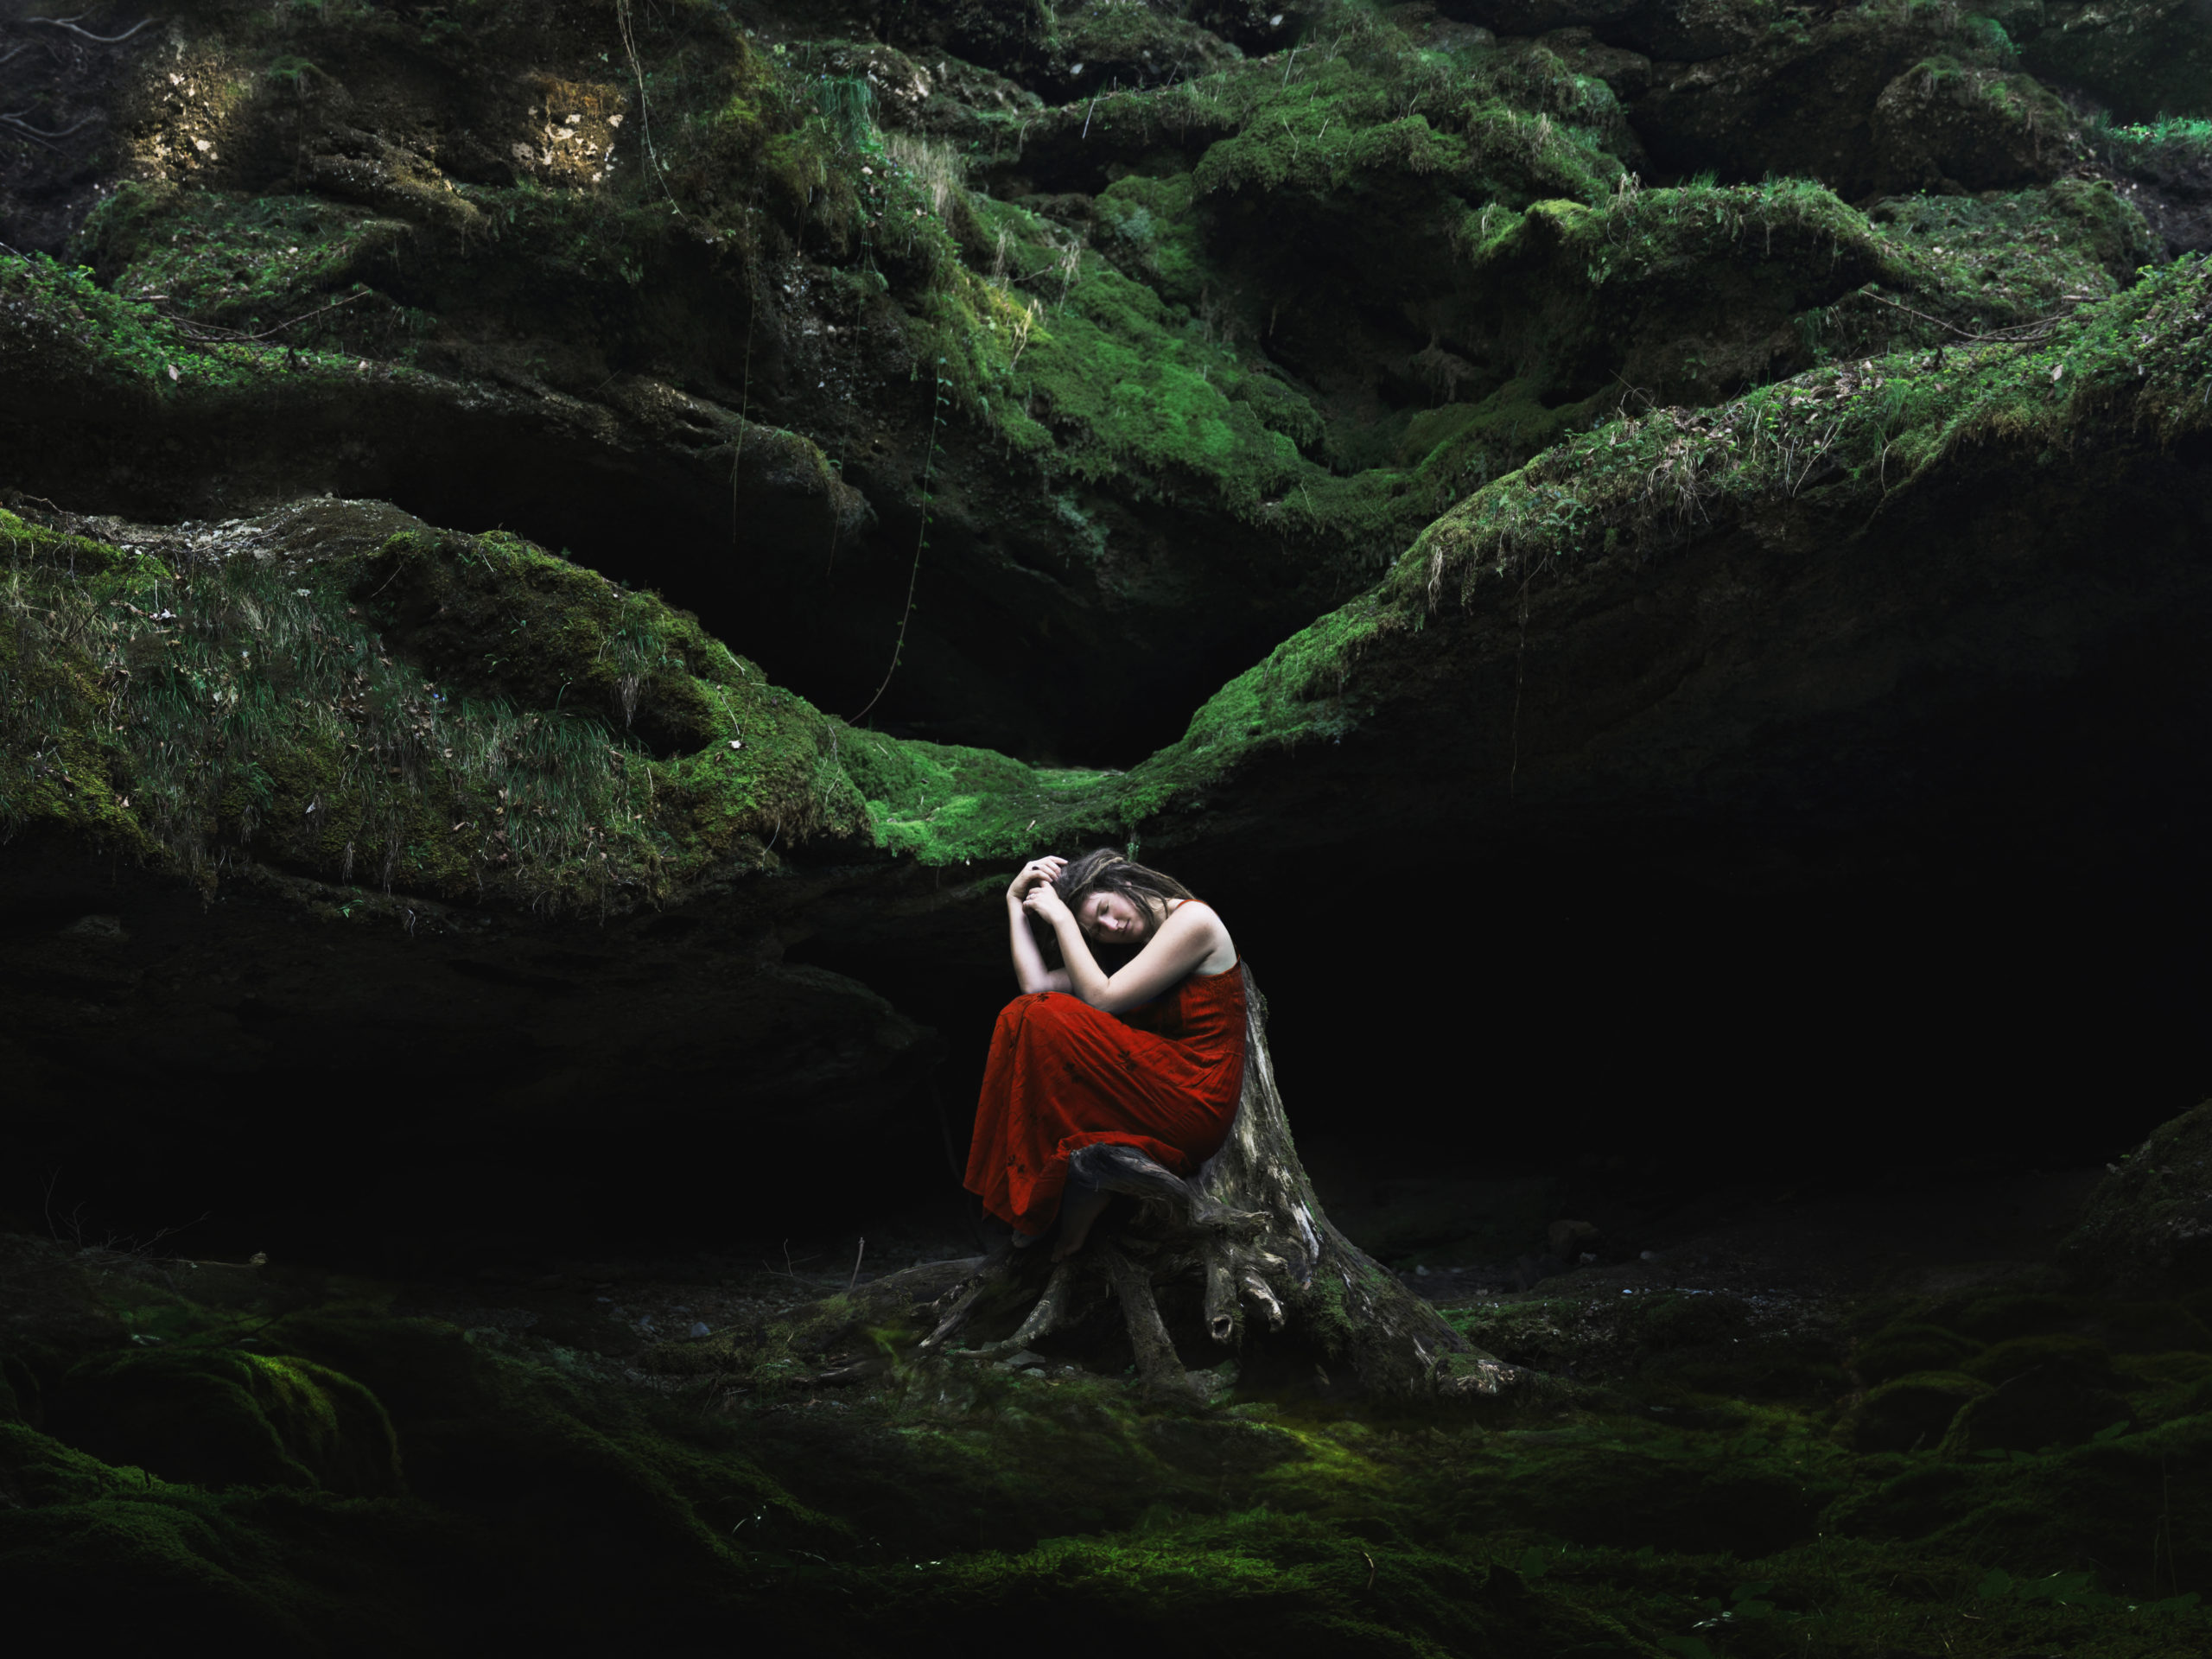 Self portrait showing a girl in a red dress in a contemplative pose in a green, mossy forest.